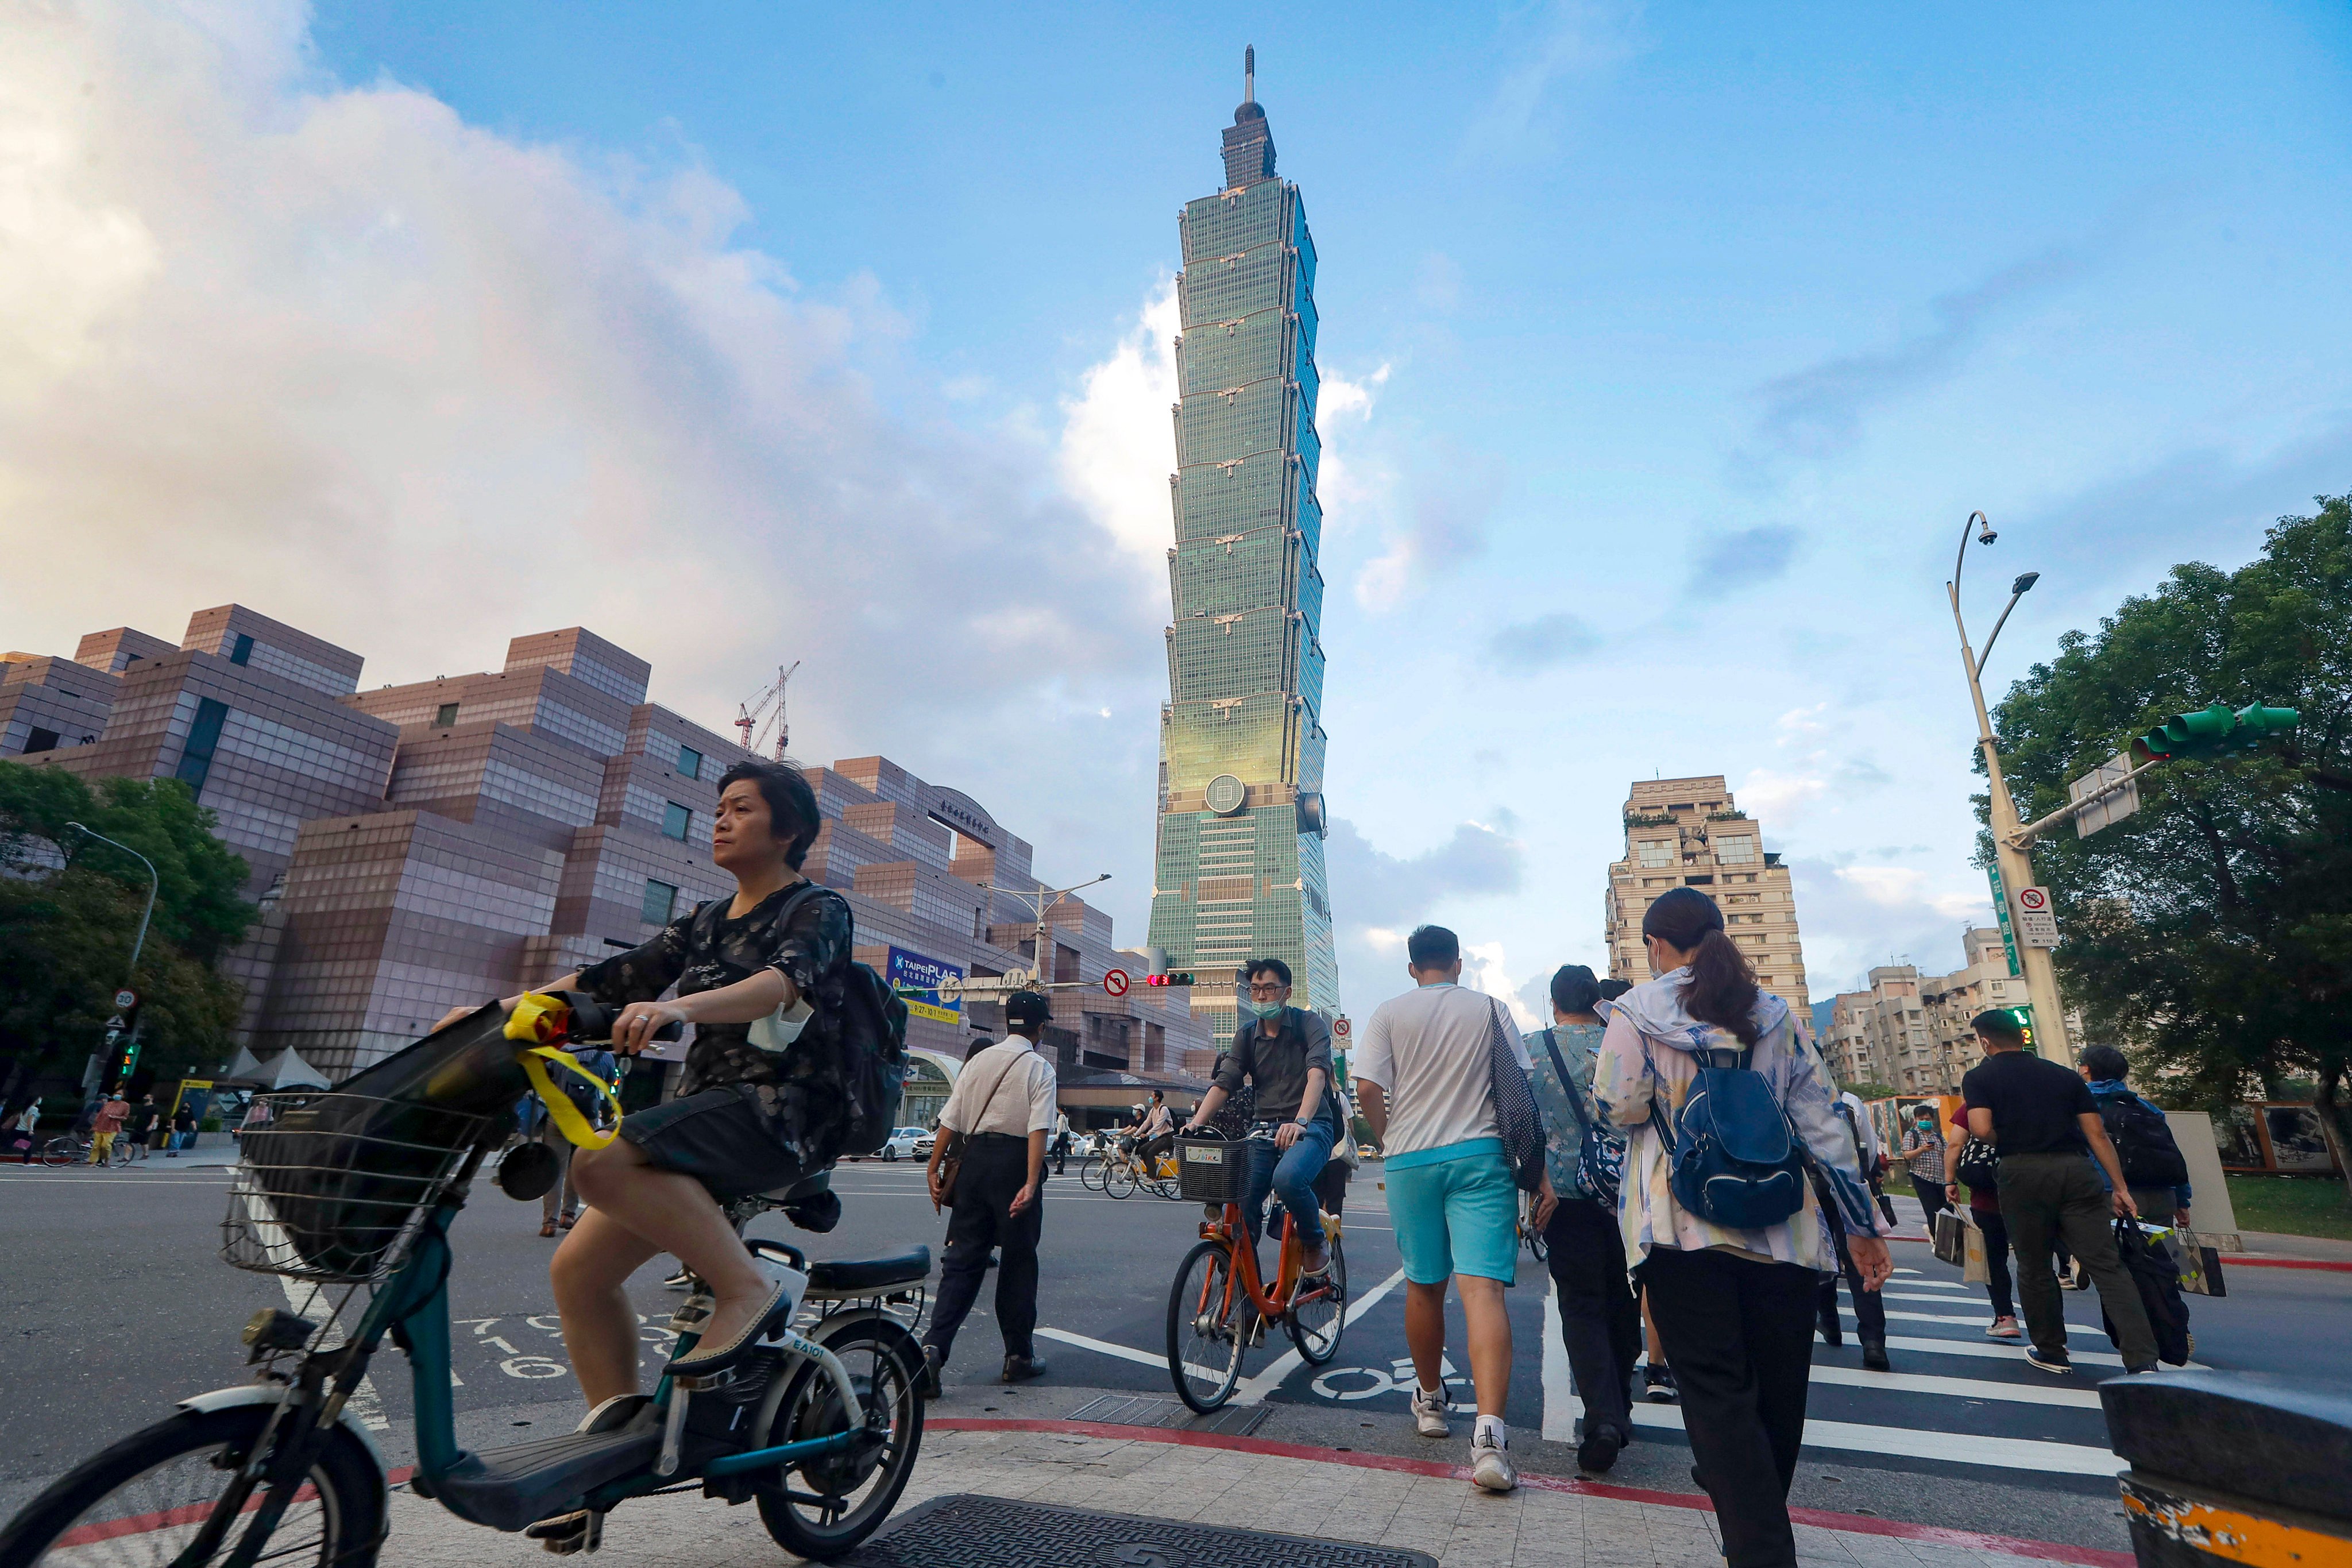 Some say more could be done to make Taiwan expat-friendly, but not all Taiwanese want a big influx of immigrants. Photo: AP